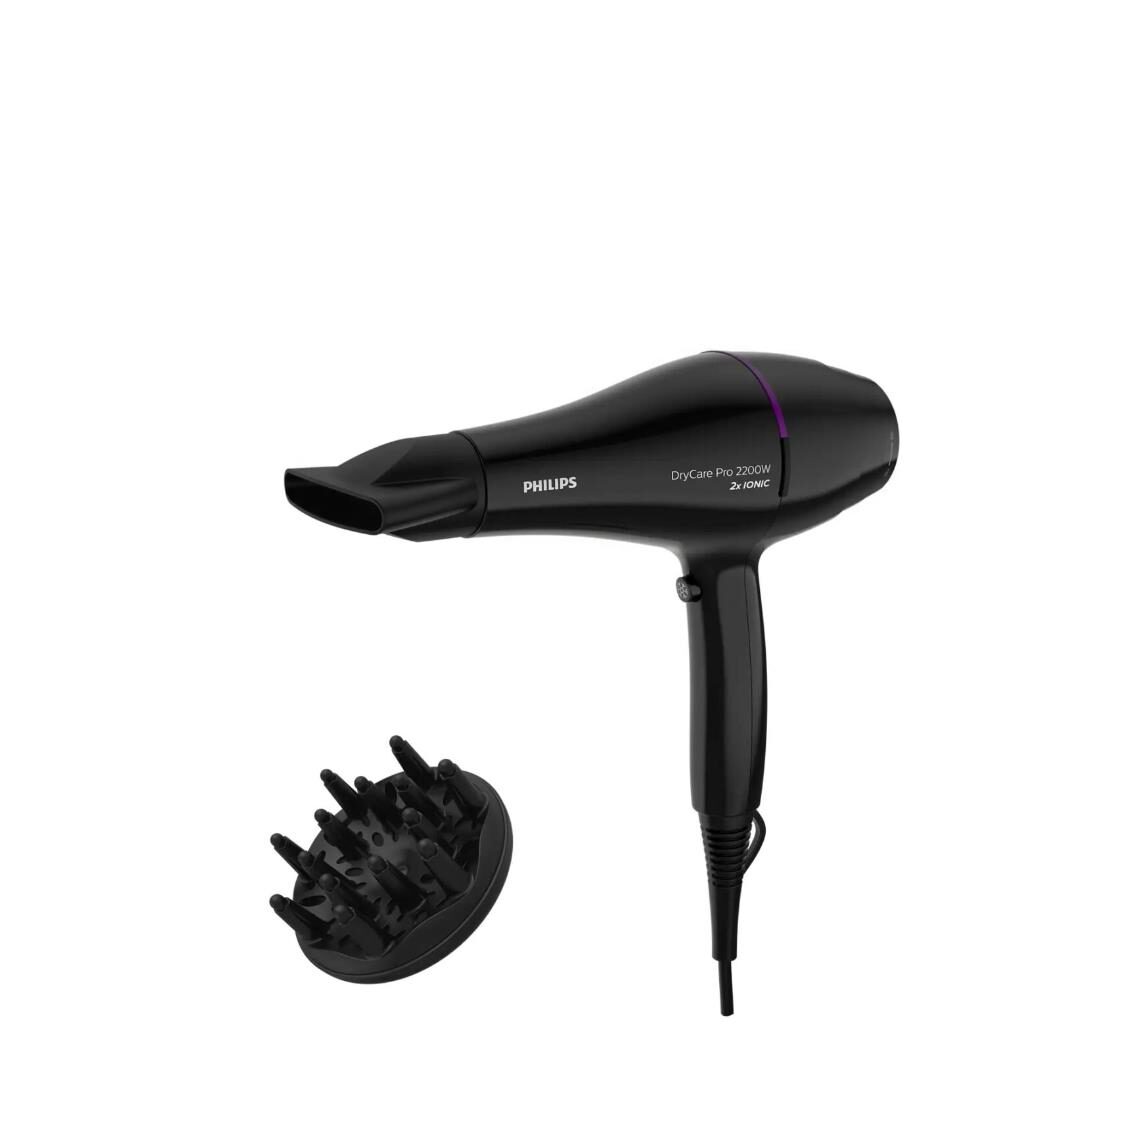 Philips 2200W Drycare Pro Hair Dryer BHD27403